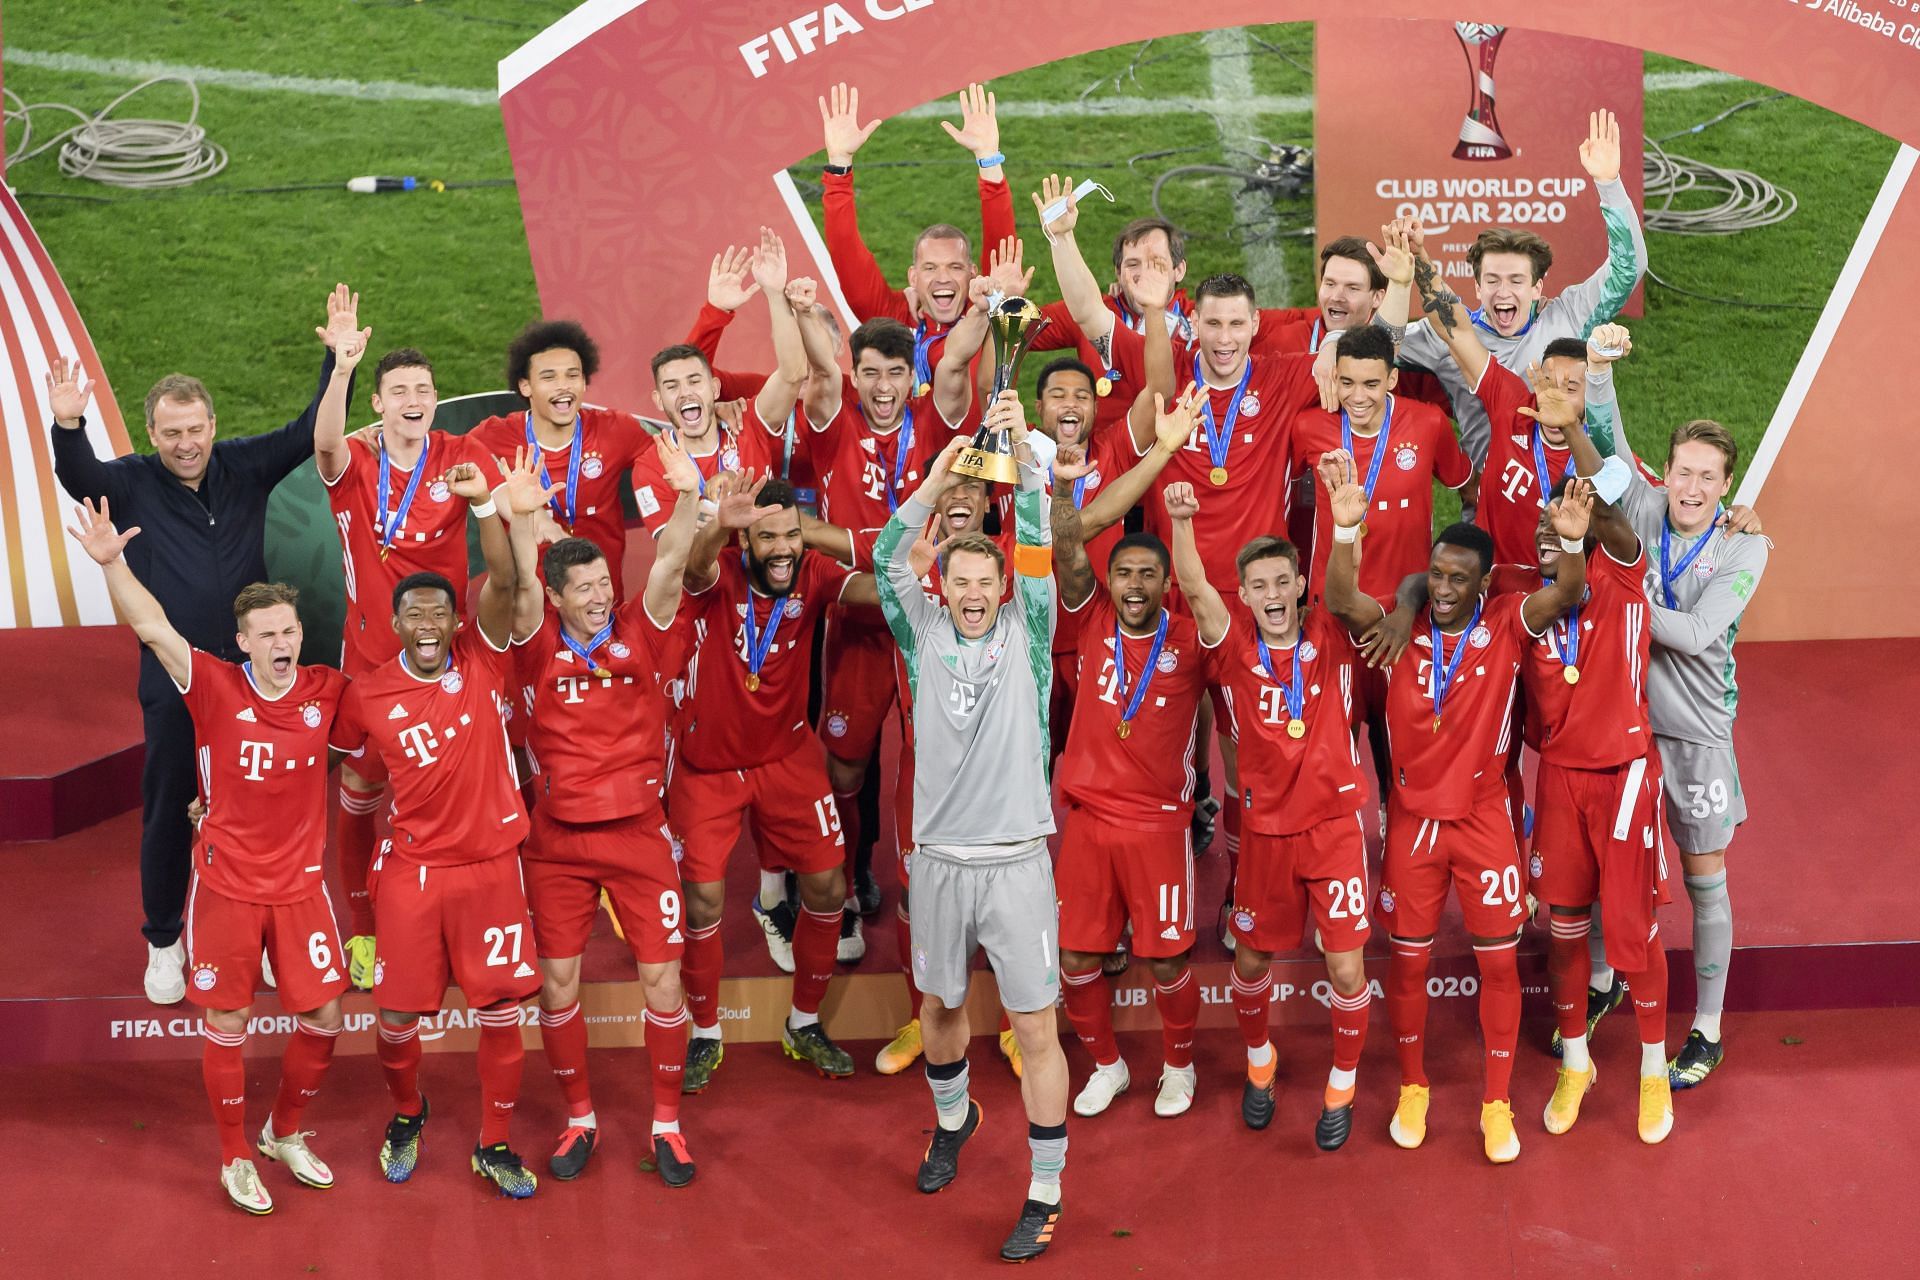 FC Bayern Muenchen have won the competition twice